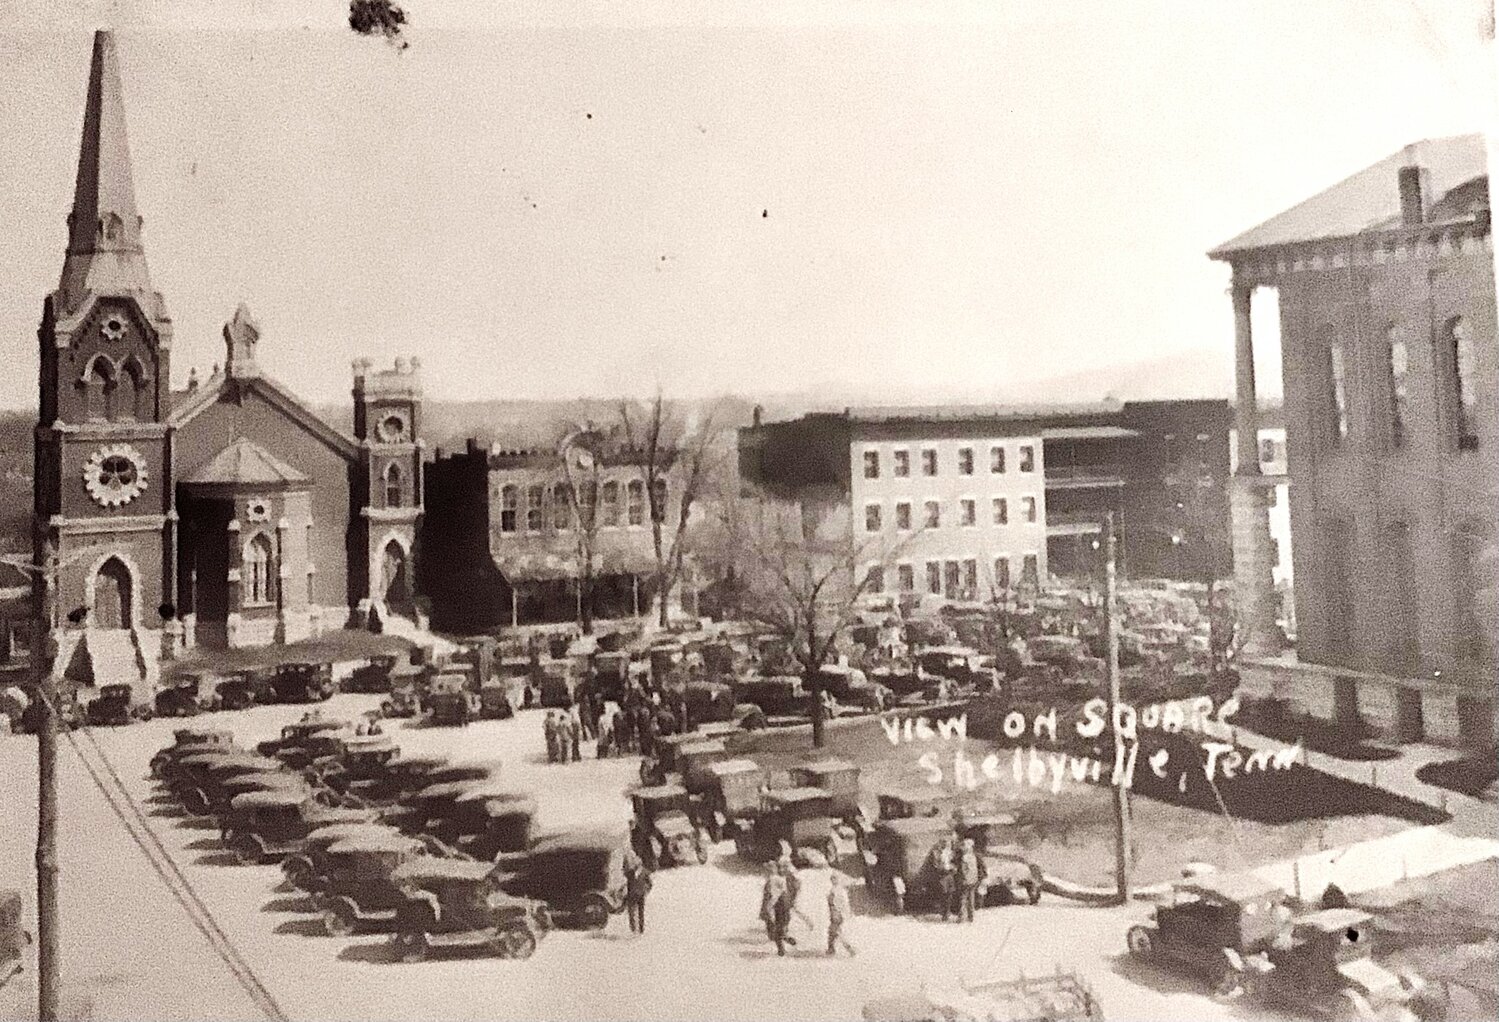 According to Lytle Hoover, who supplied us with this photo, this is what the Shelbyville square looked like between the 1930s and 1940s, when his family lived here.